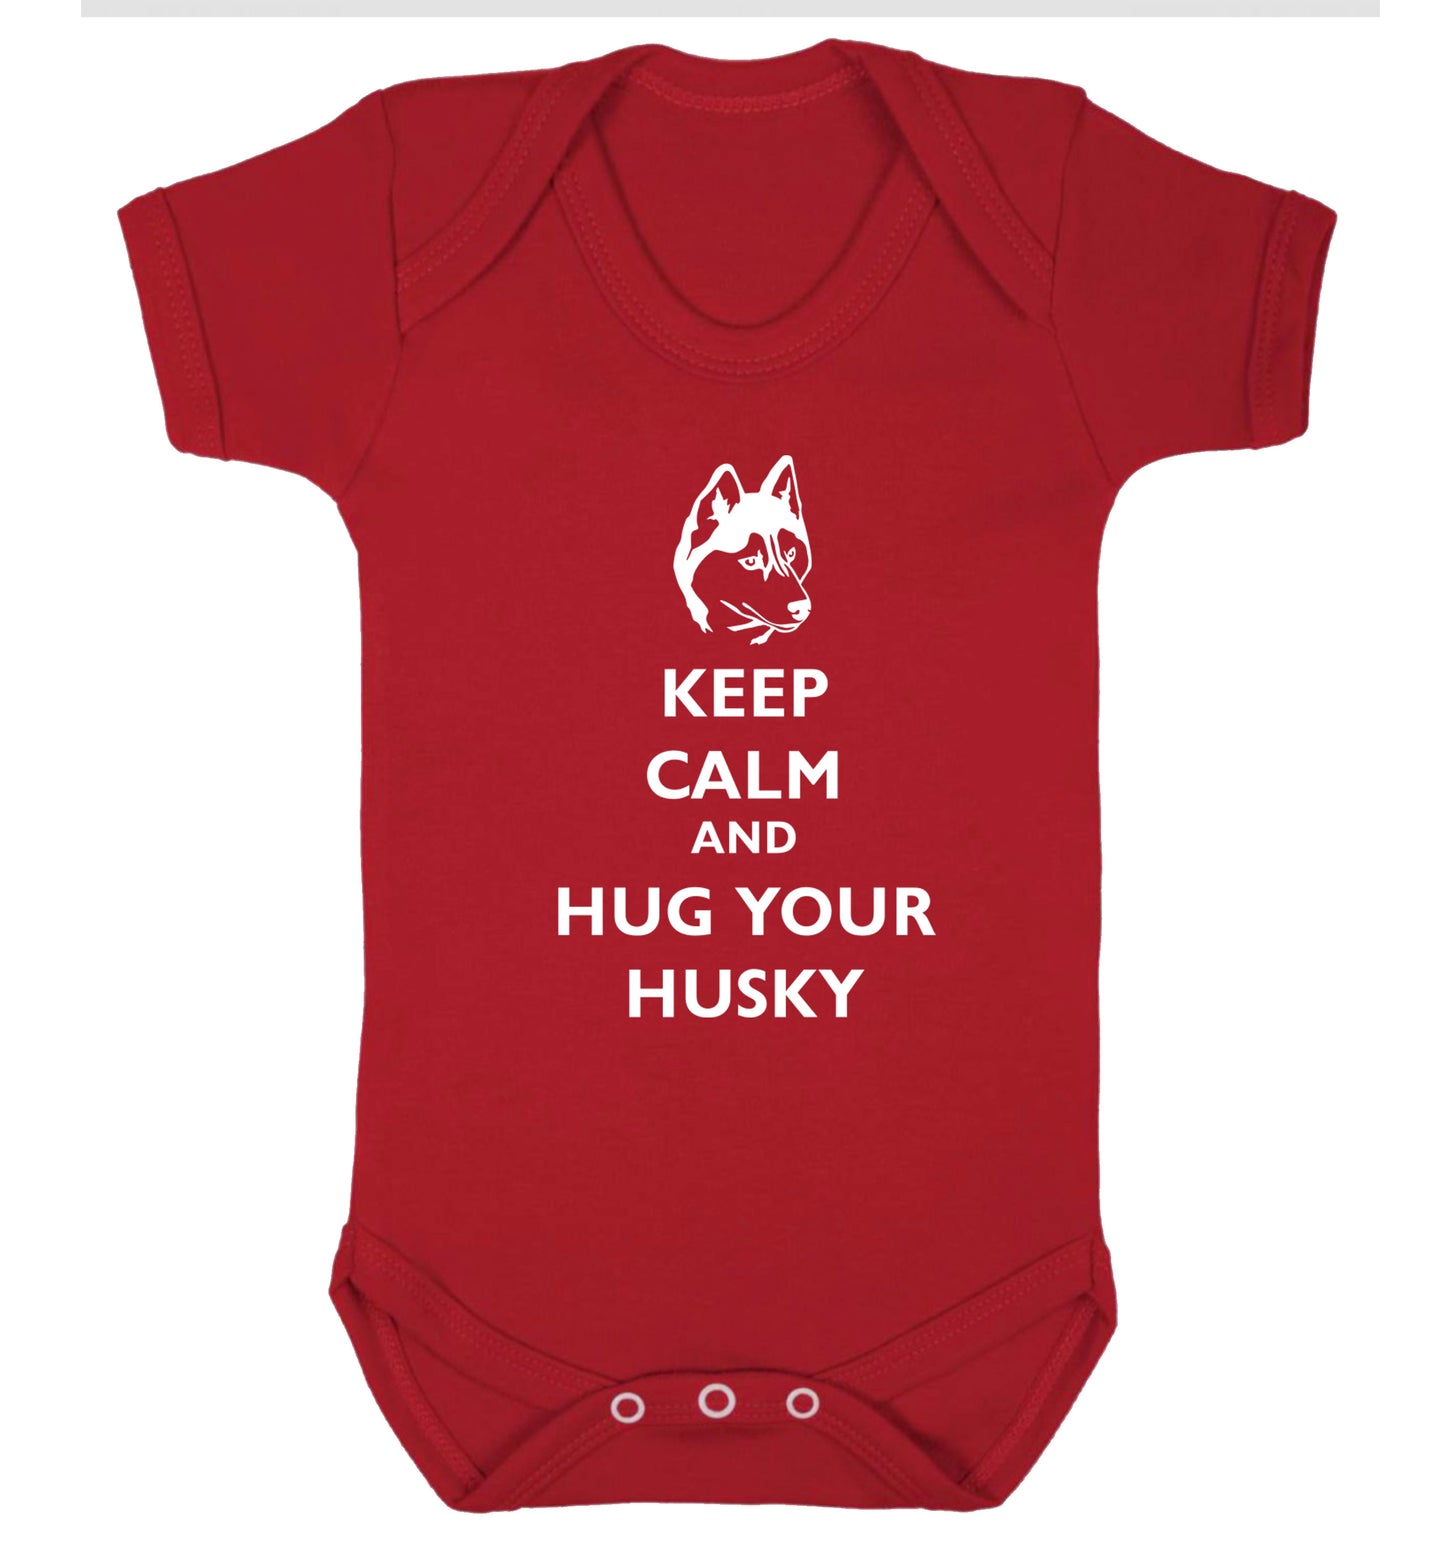 Keep calm and hug your husky Baby Vest red 18-24 months